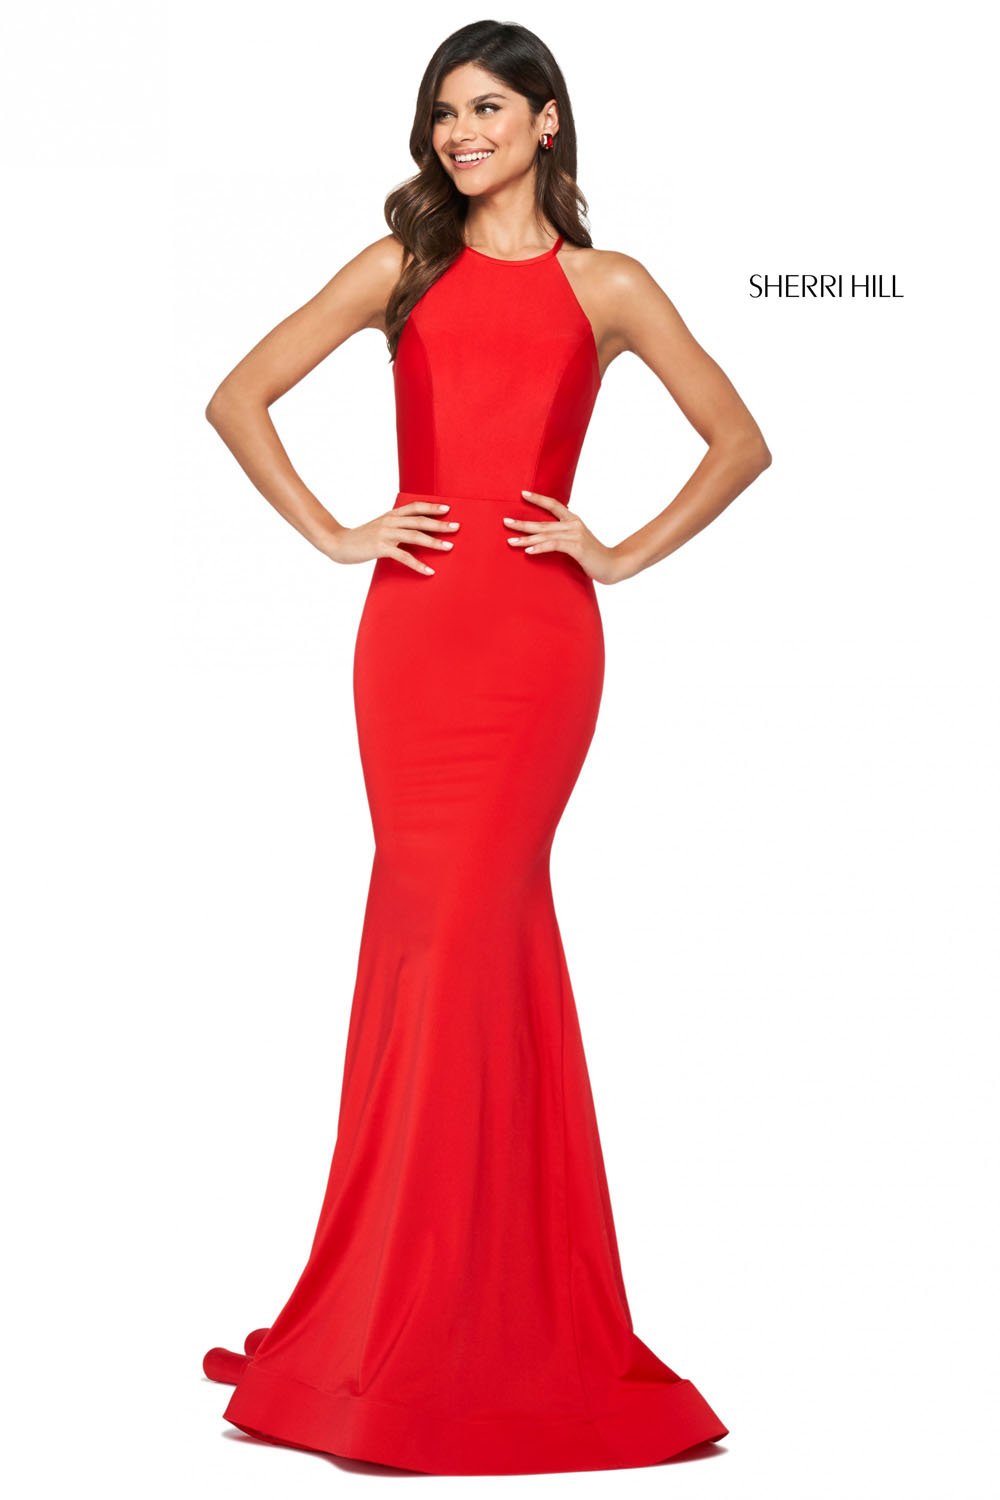 Sherri Hill 53663 dress images in these colors: Black, Red, Dark Coral, Royal, Turquoise, Blush, Light Blue, Yellow, Emerald, Ruby, Coral, Navy, Fuchsia, Dark Periwinkle.